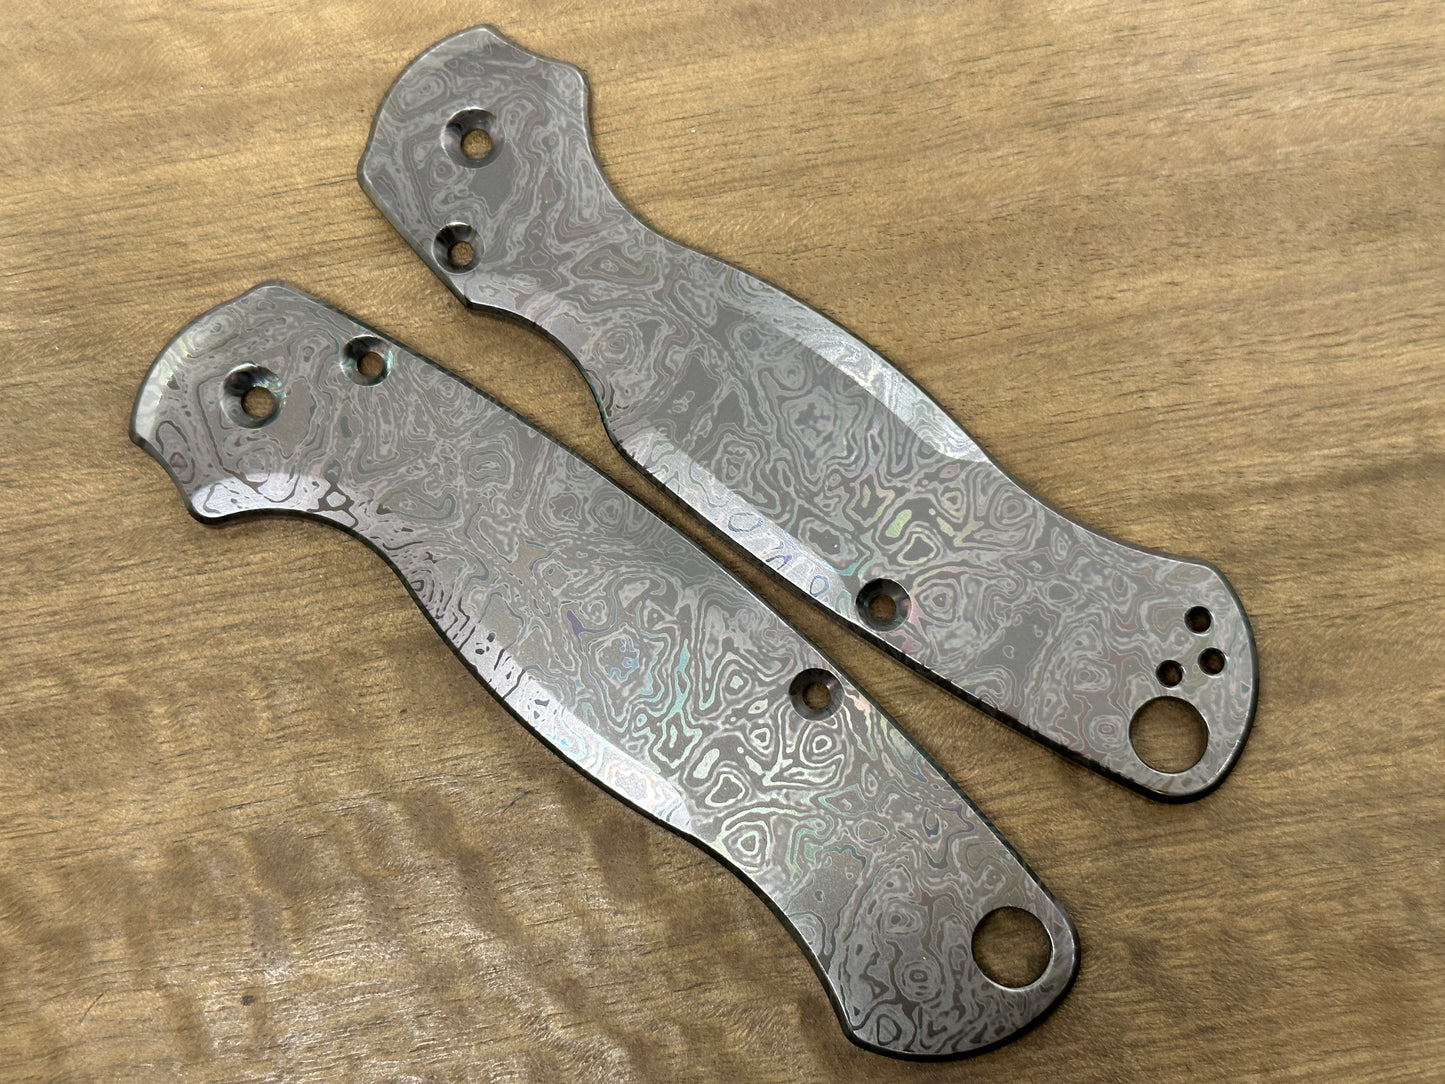 ALIEN Polished engraved Zirconium scales for Spyderco Paramilitary 2 PM2